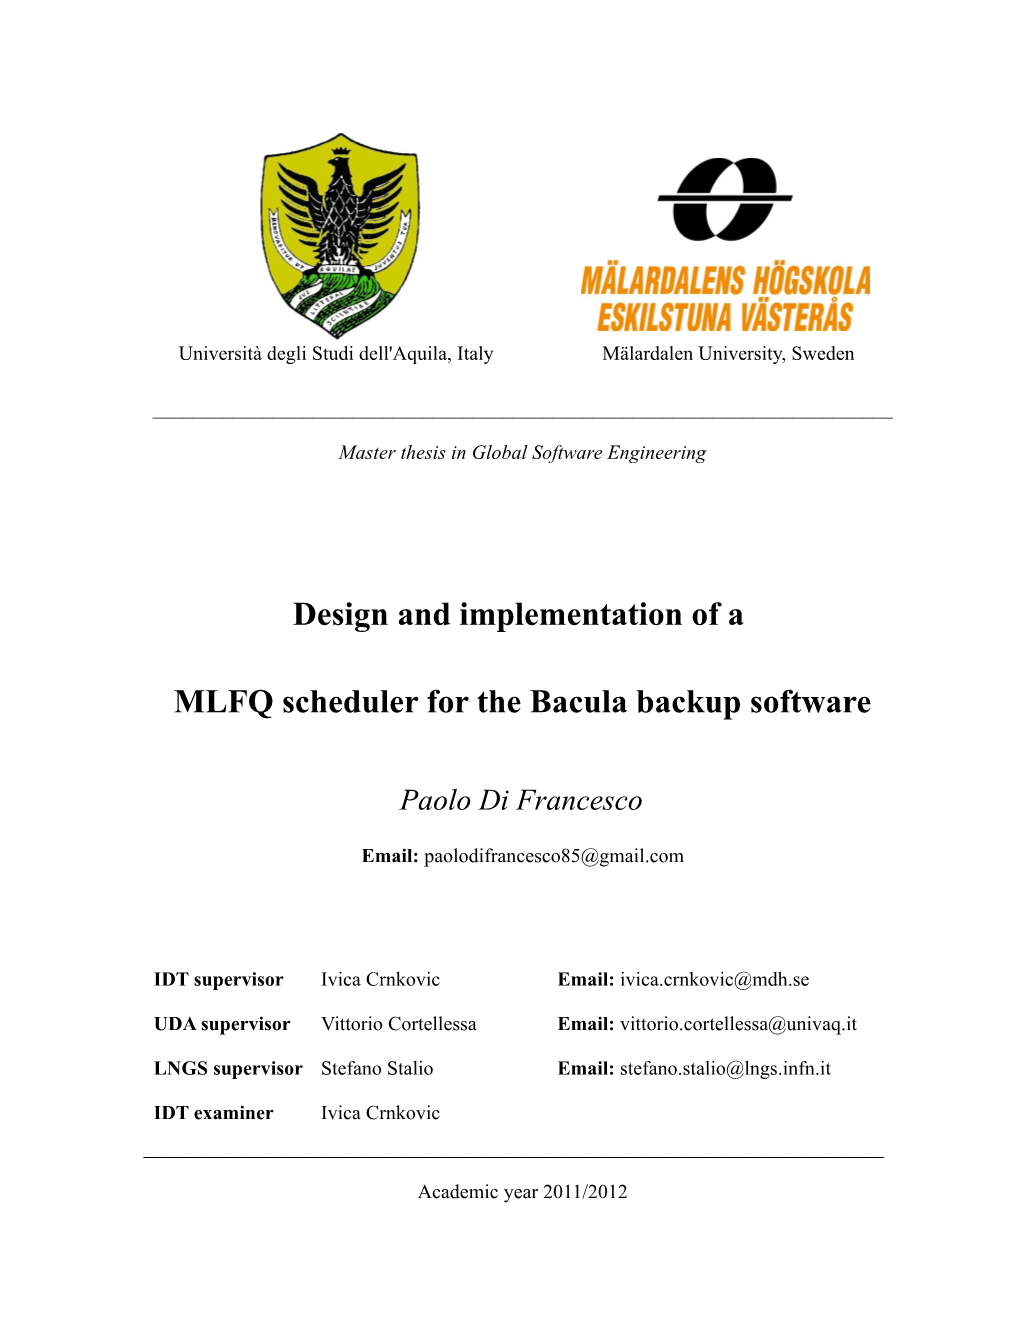 Design and Implementation of a MLFQ Scheduler for the Bacula Backup